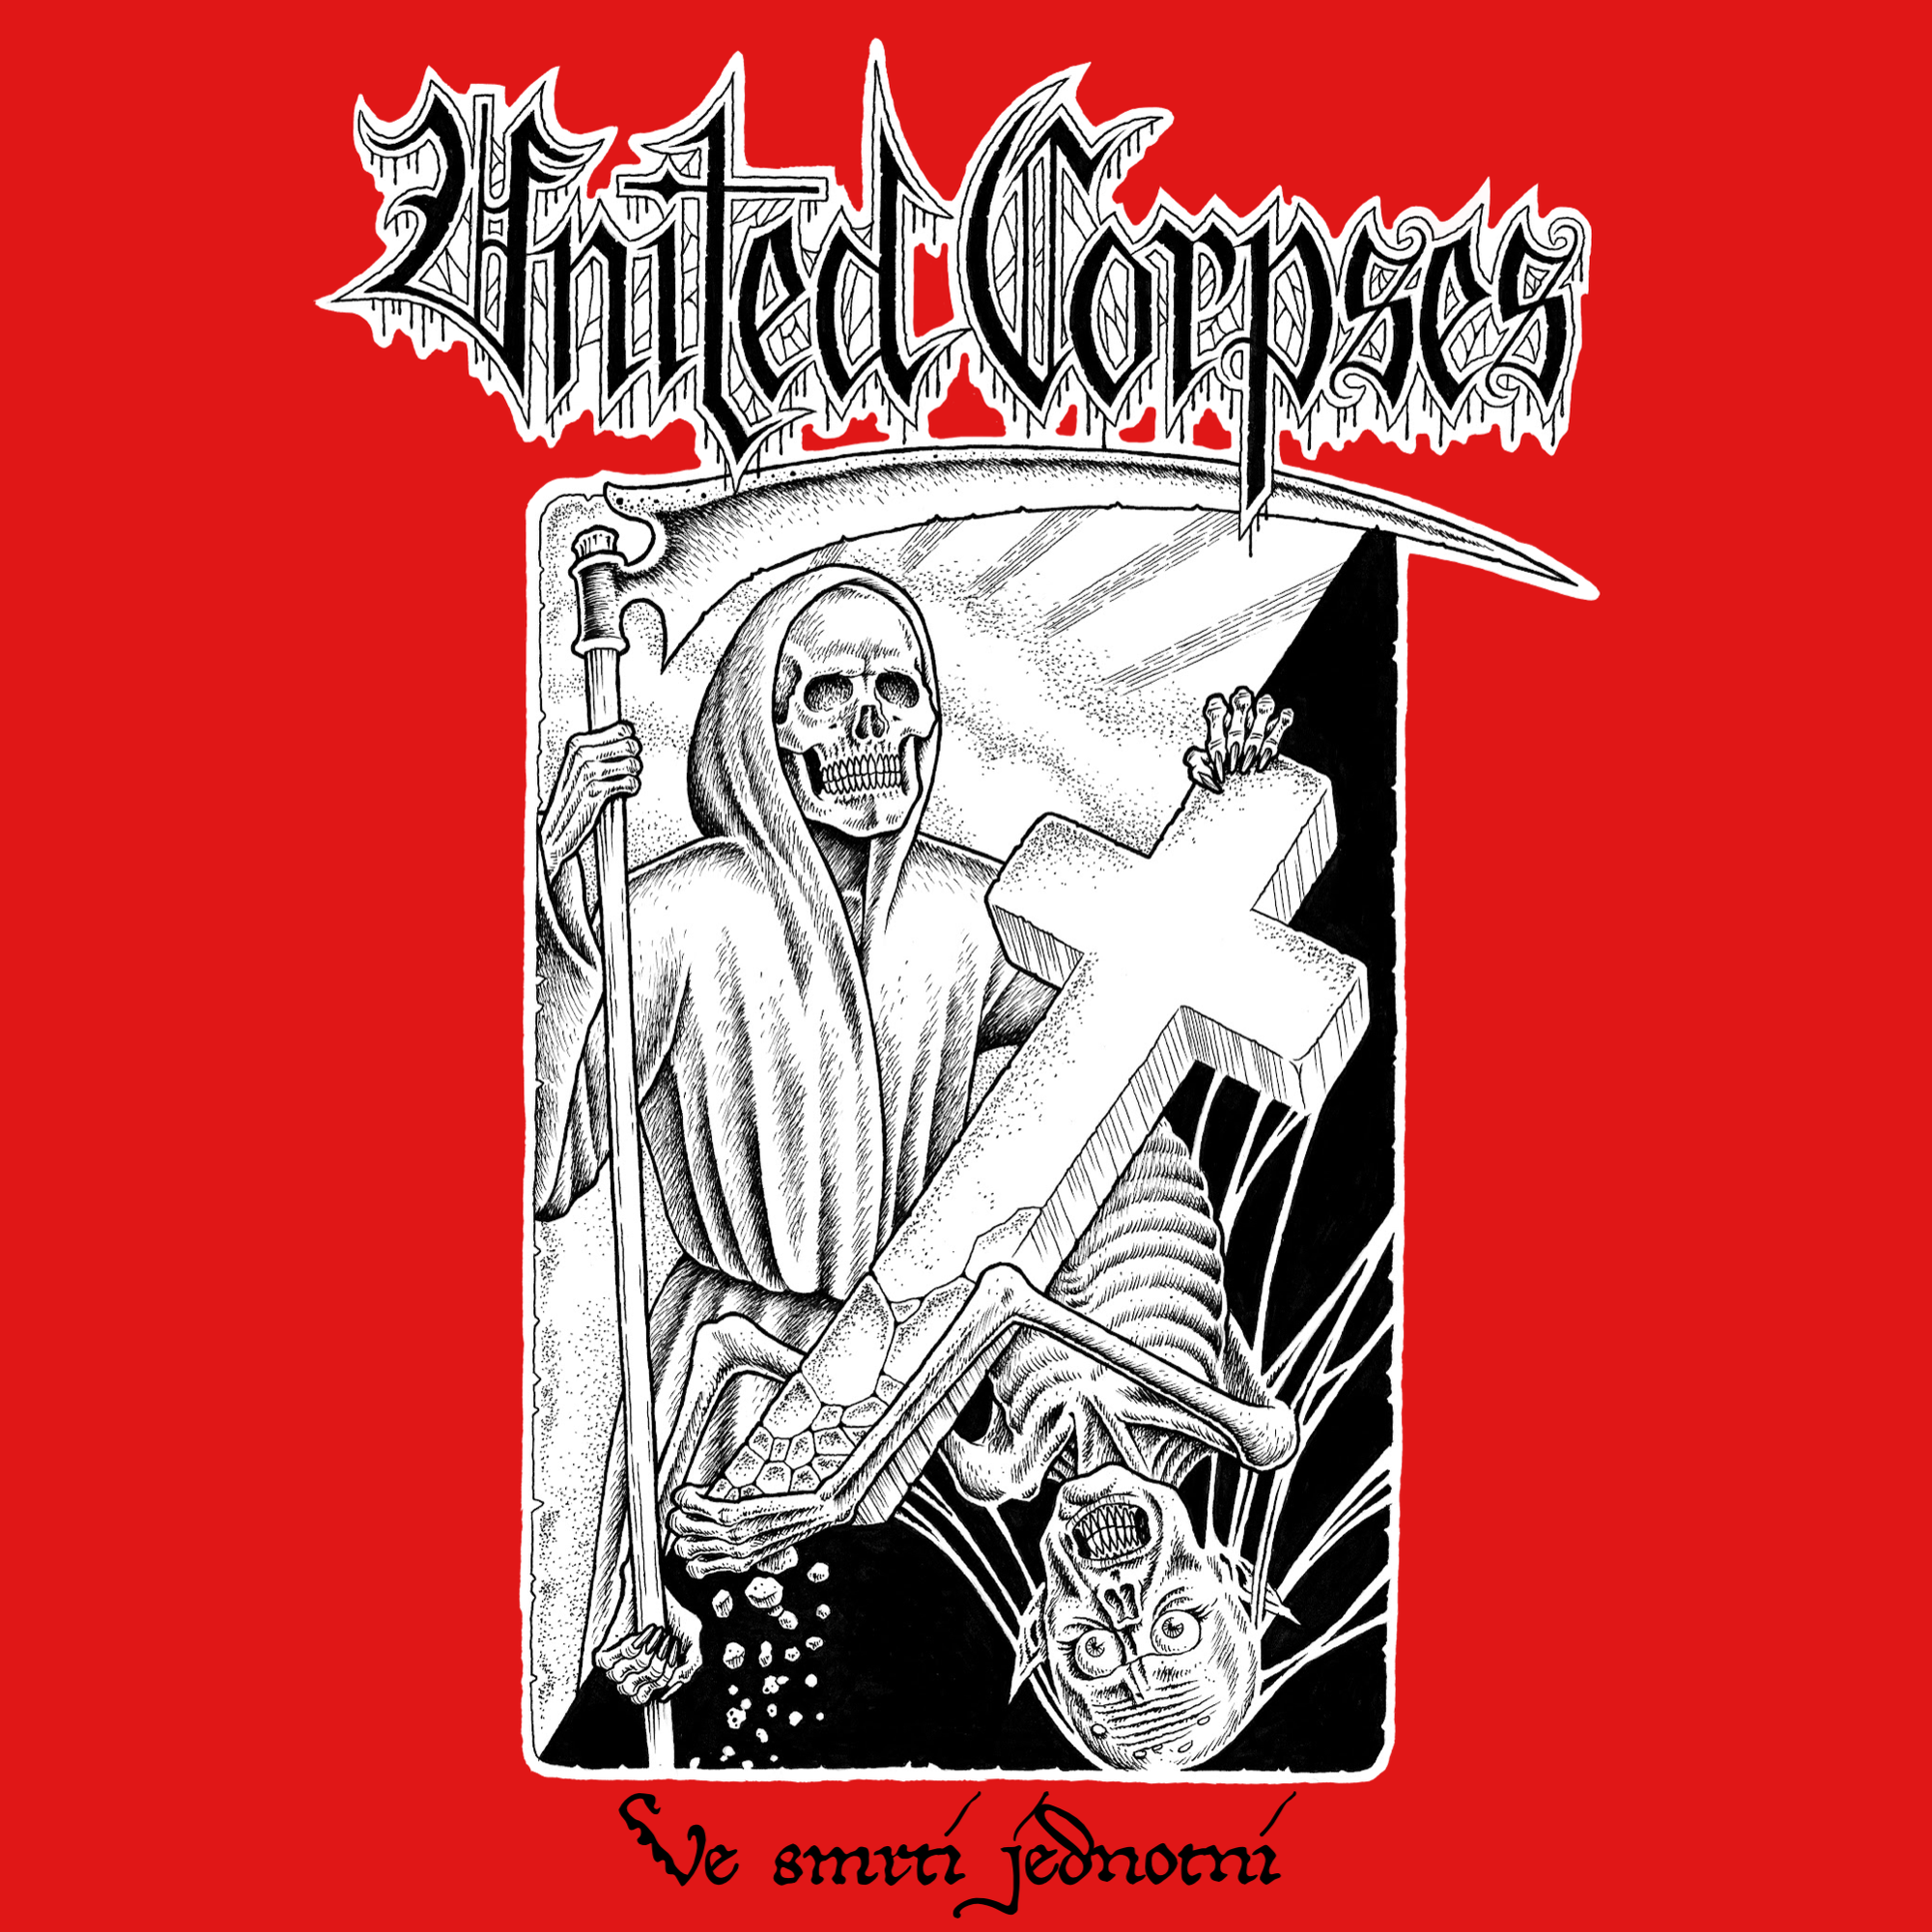 Interview with UNITED CORPSES